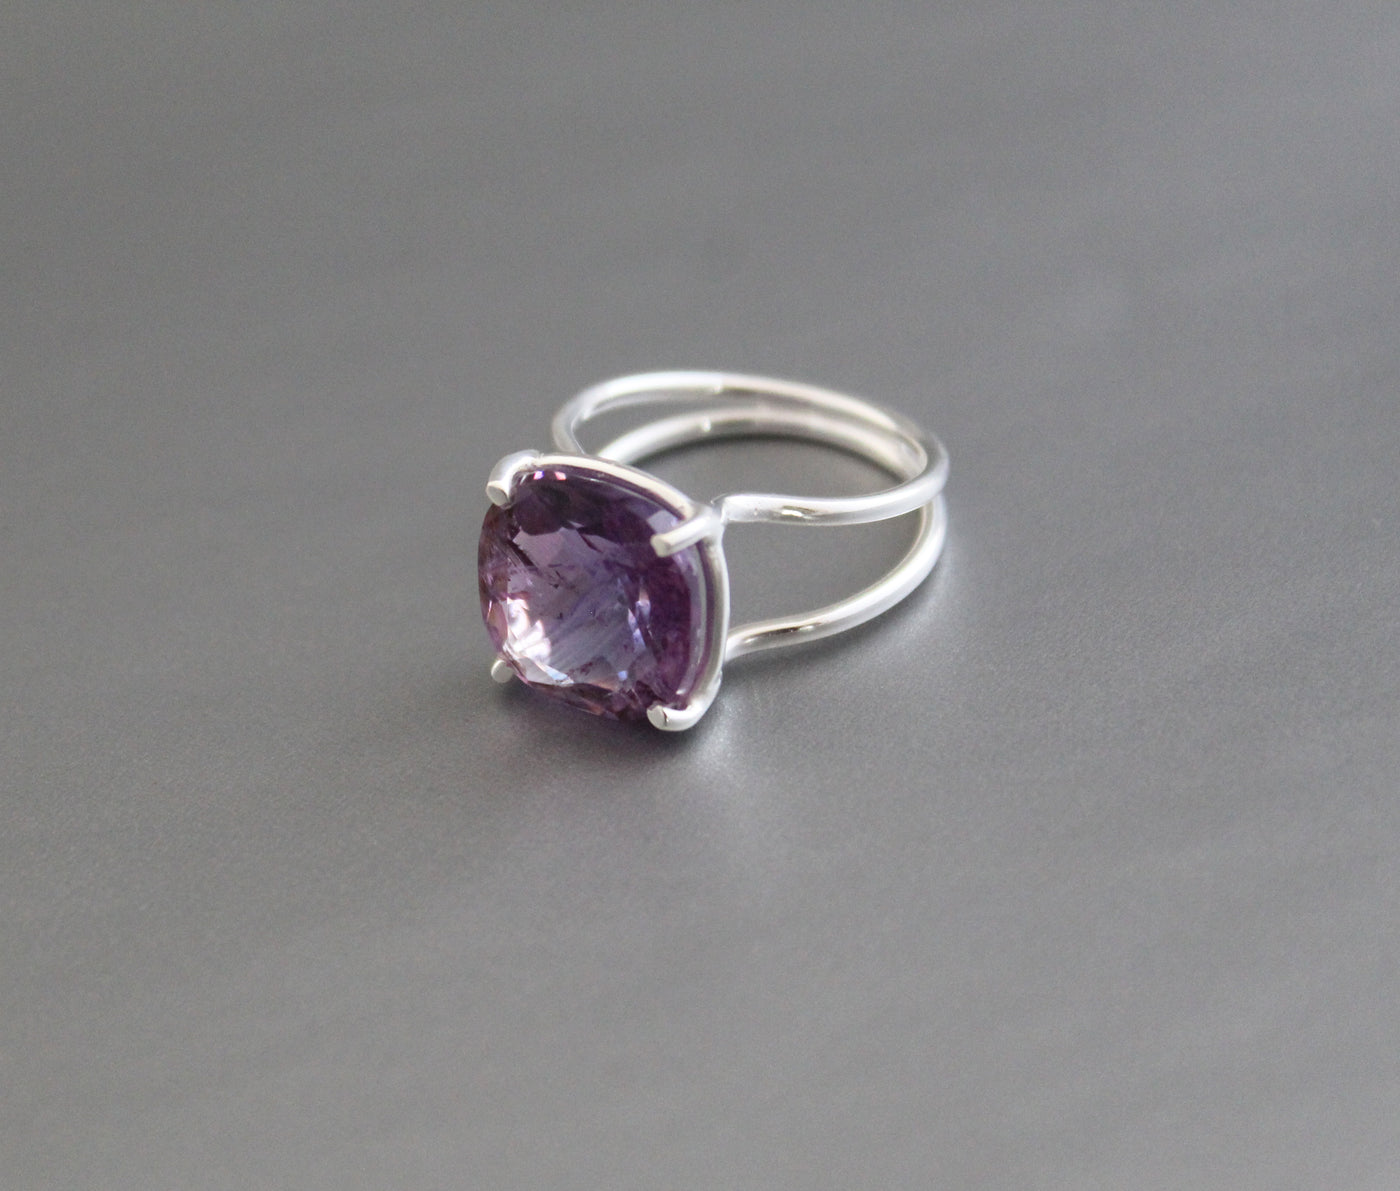 Natural Amethyst Ring, Crystal Ring, Sterling Silver Ring, Purple Amethyst Ring, Minimalist Ring, Stack Ring, Birthstone Jewelry, Rings